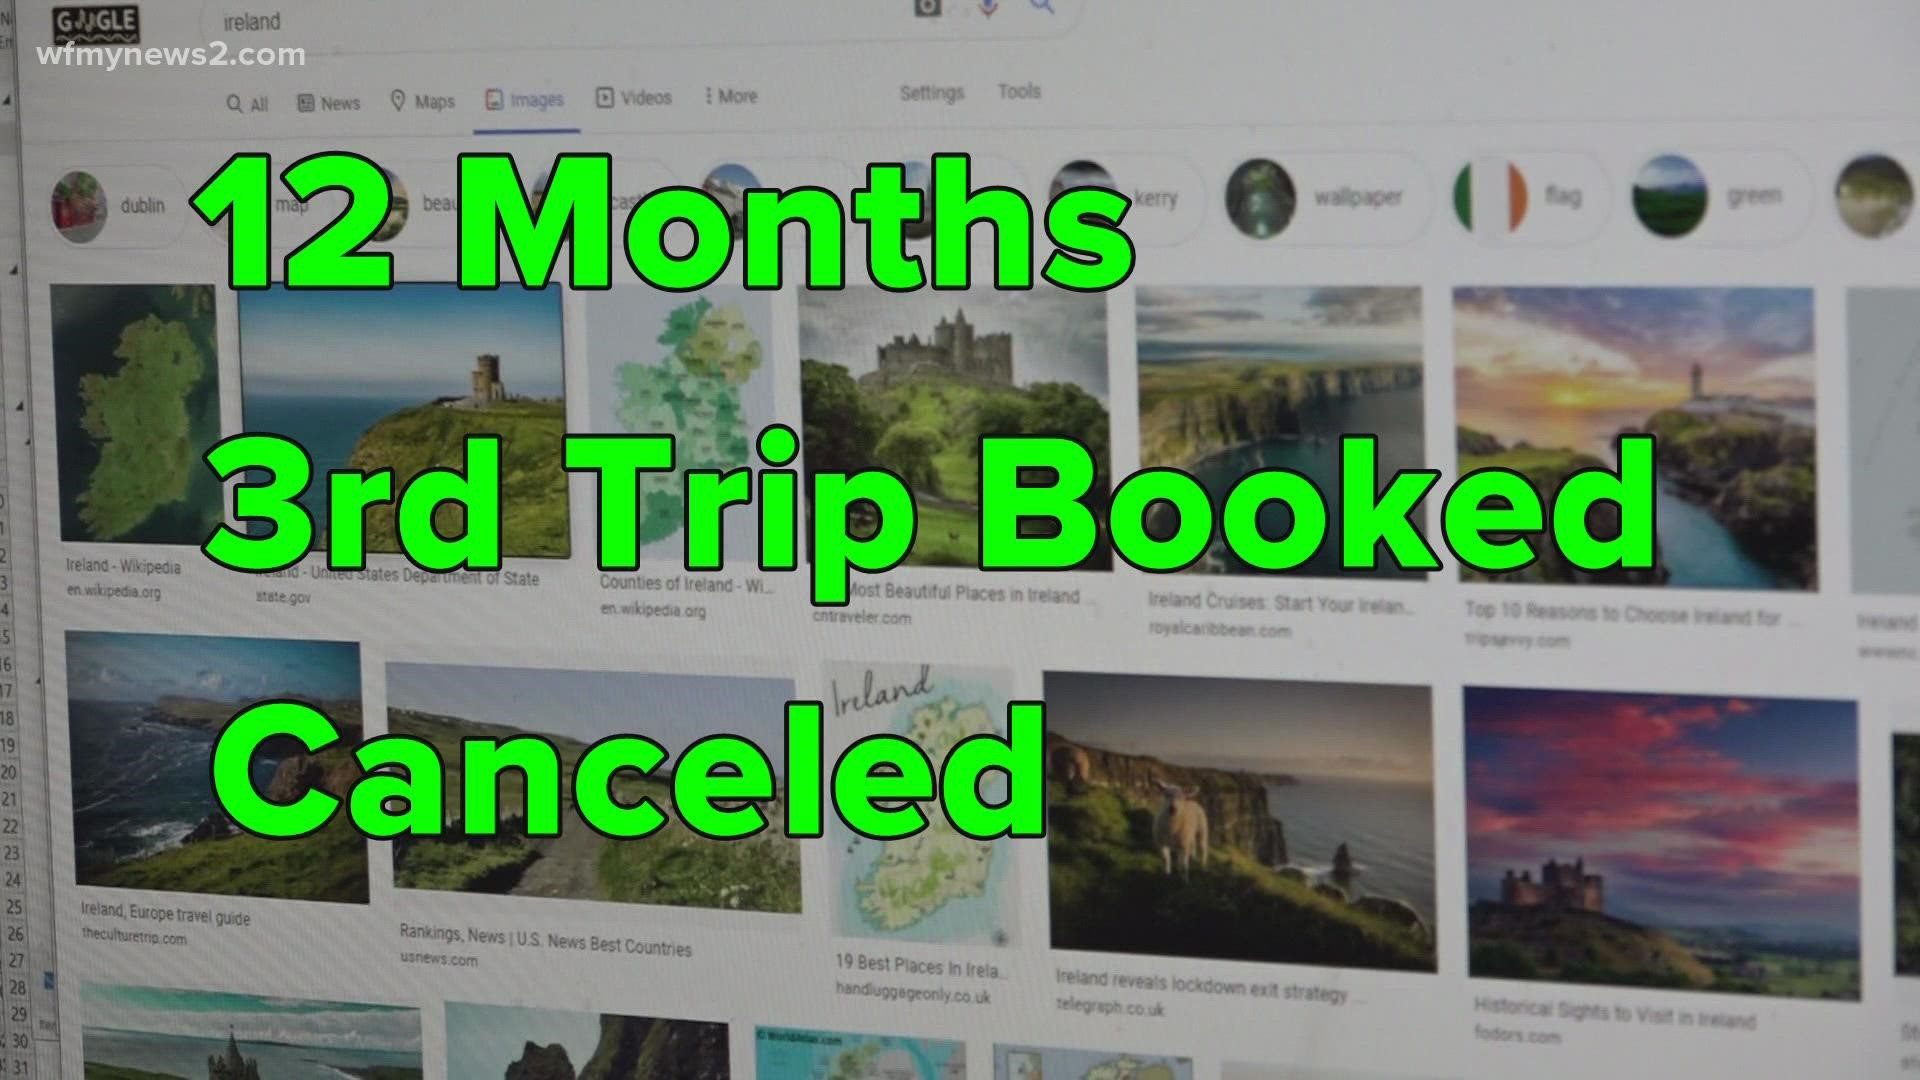 It was going to be a once-in-a-lifetime trip to Ireland. The trip scheduled for 2020 was canceled because of COVID. Two other bookings were also canceled.